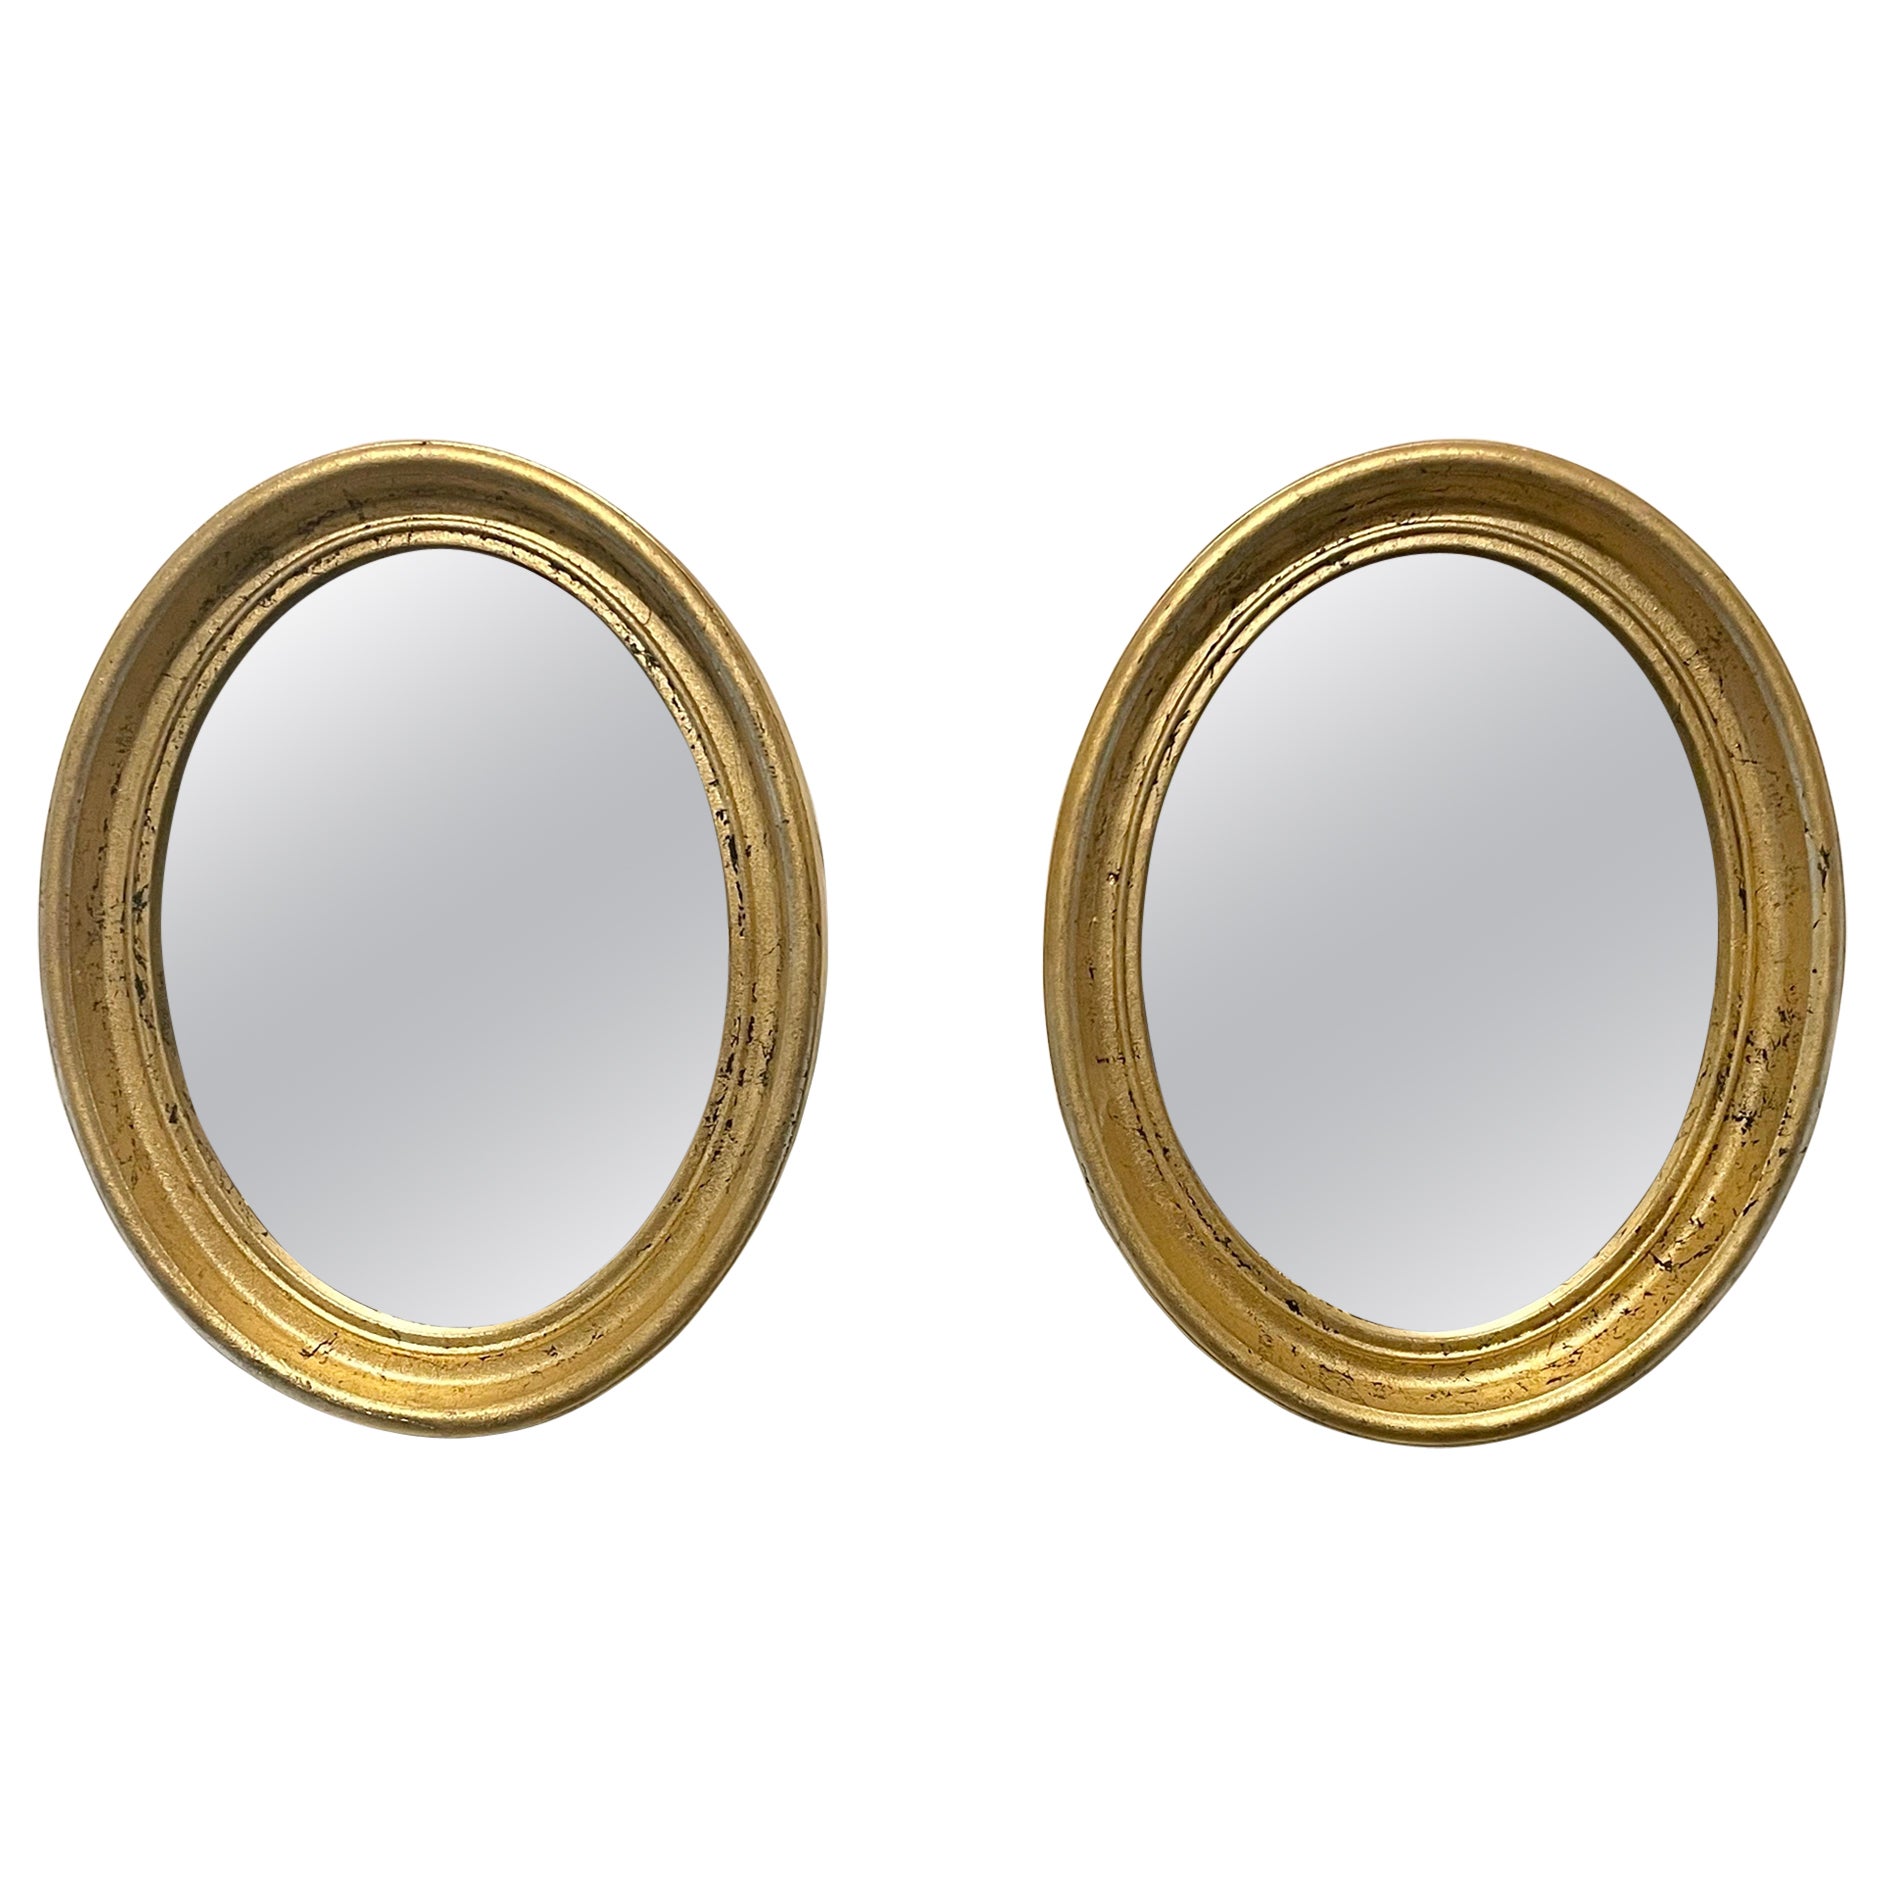 Pair Of Vintage Gilt Oval Italian Mirrors For Sale